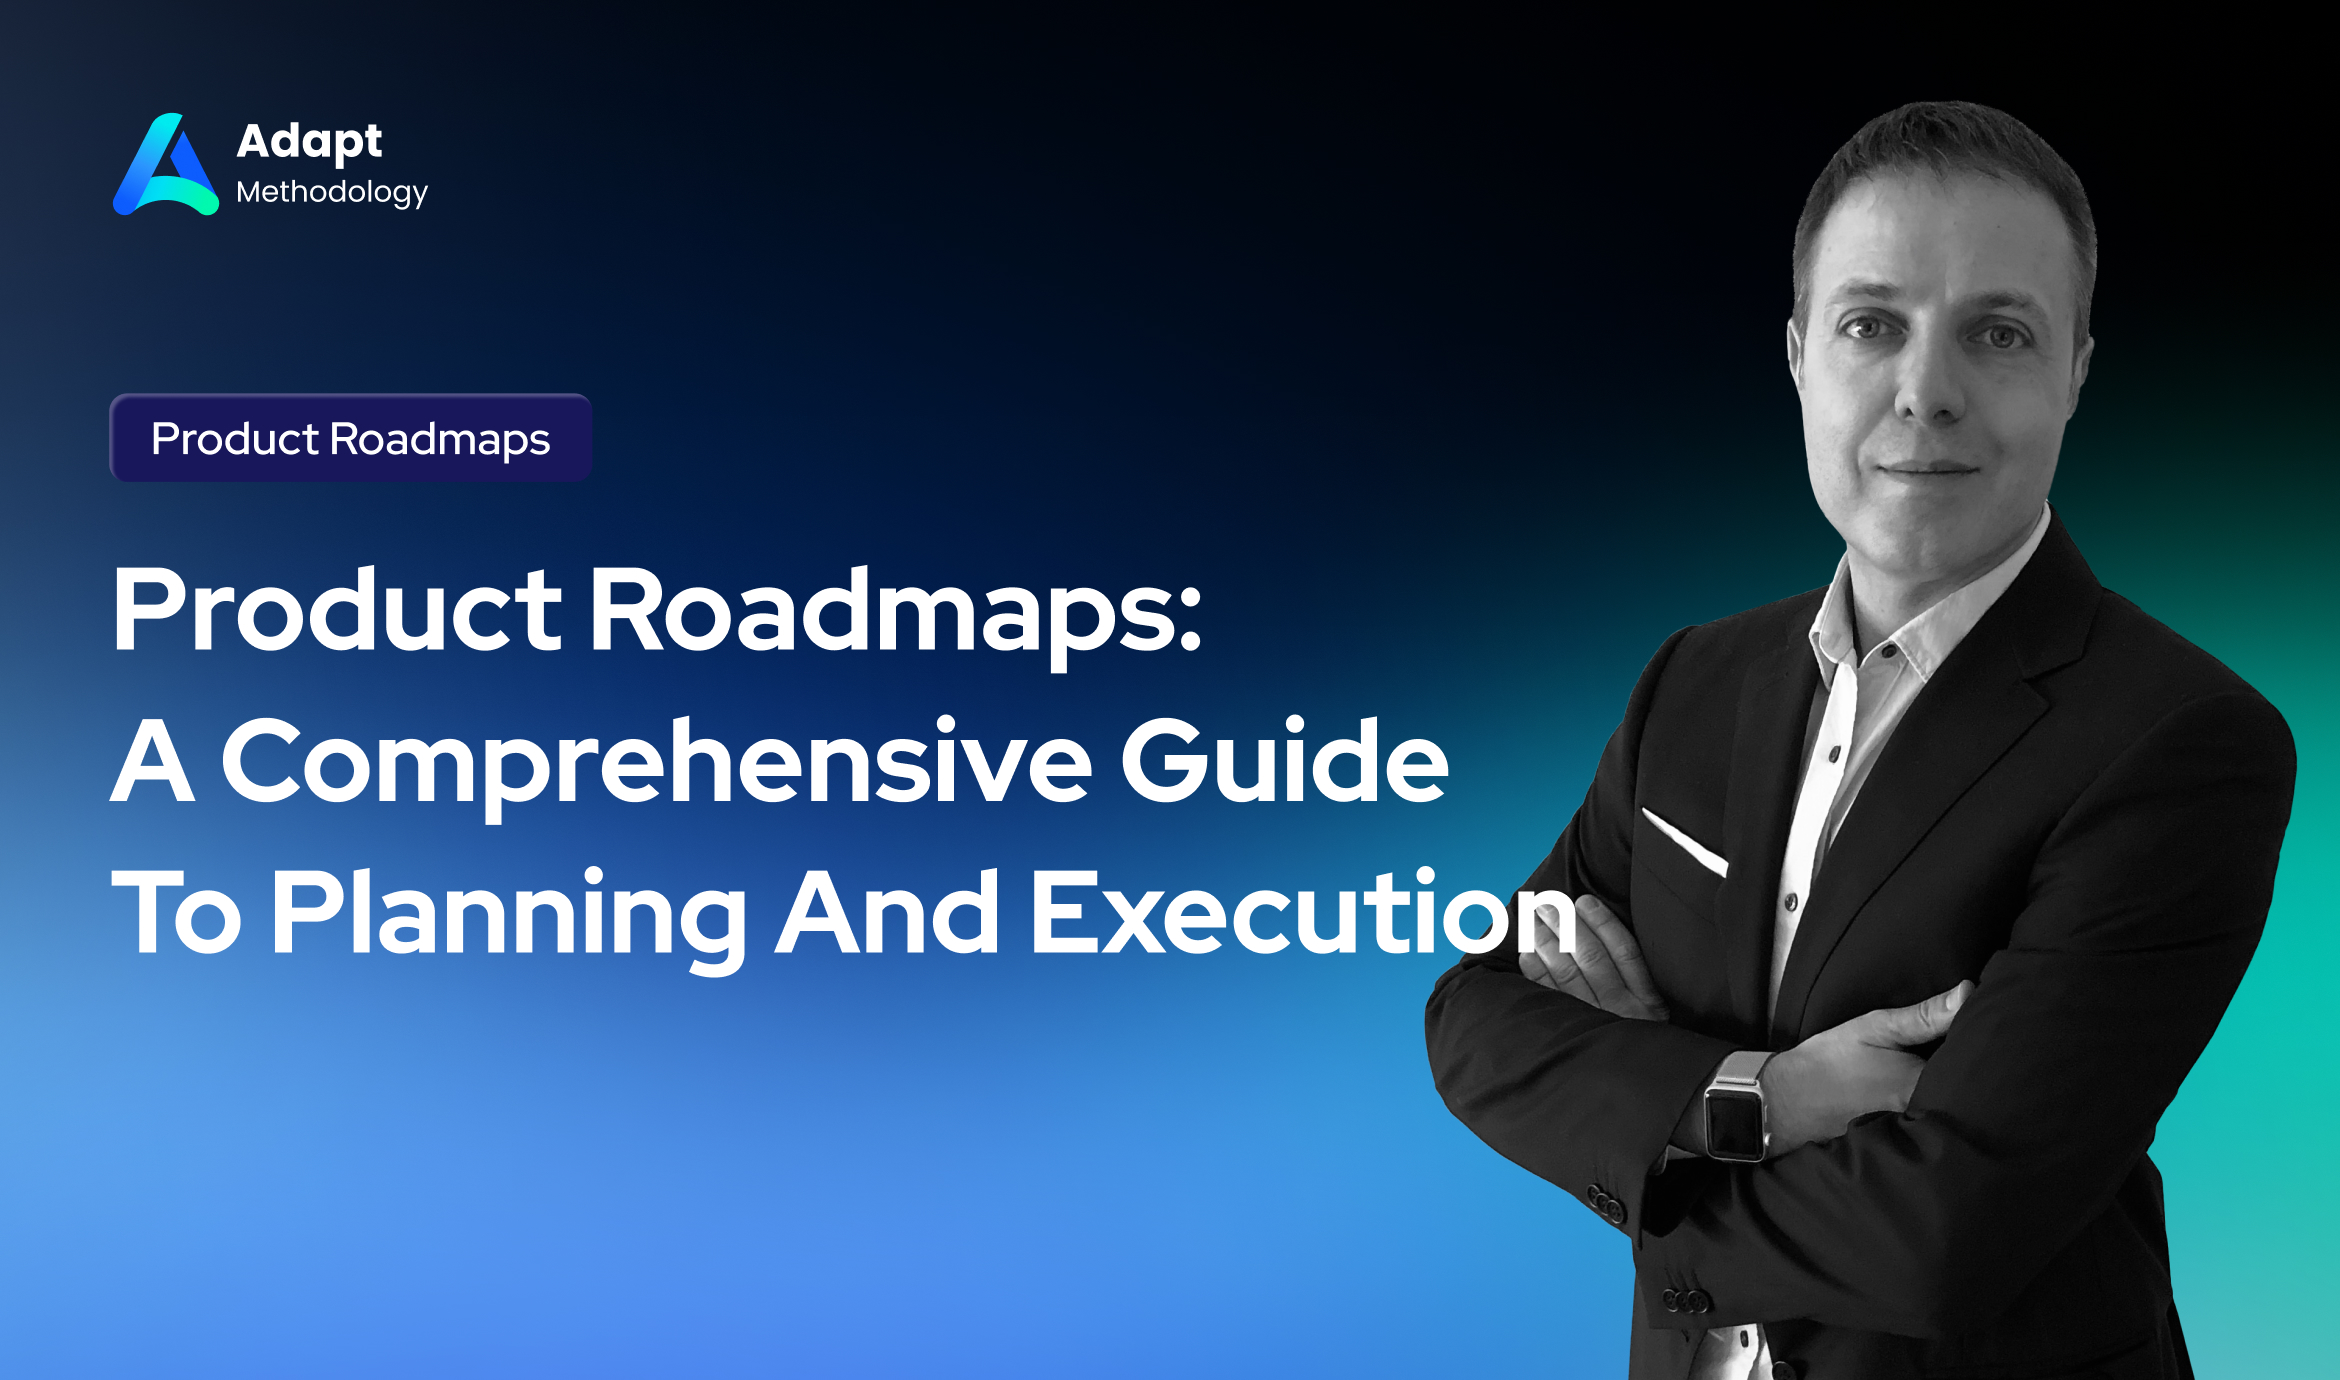 Product Roadmaps - A Comprehensive Guide To Planning And Execution